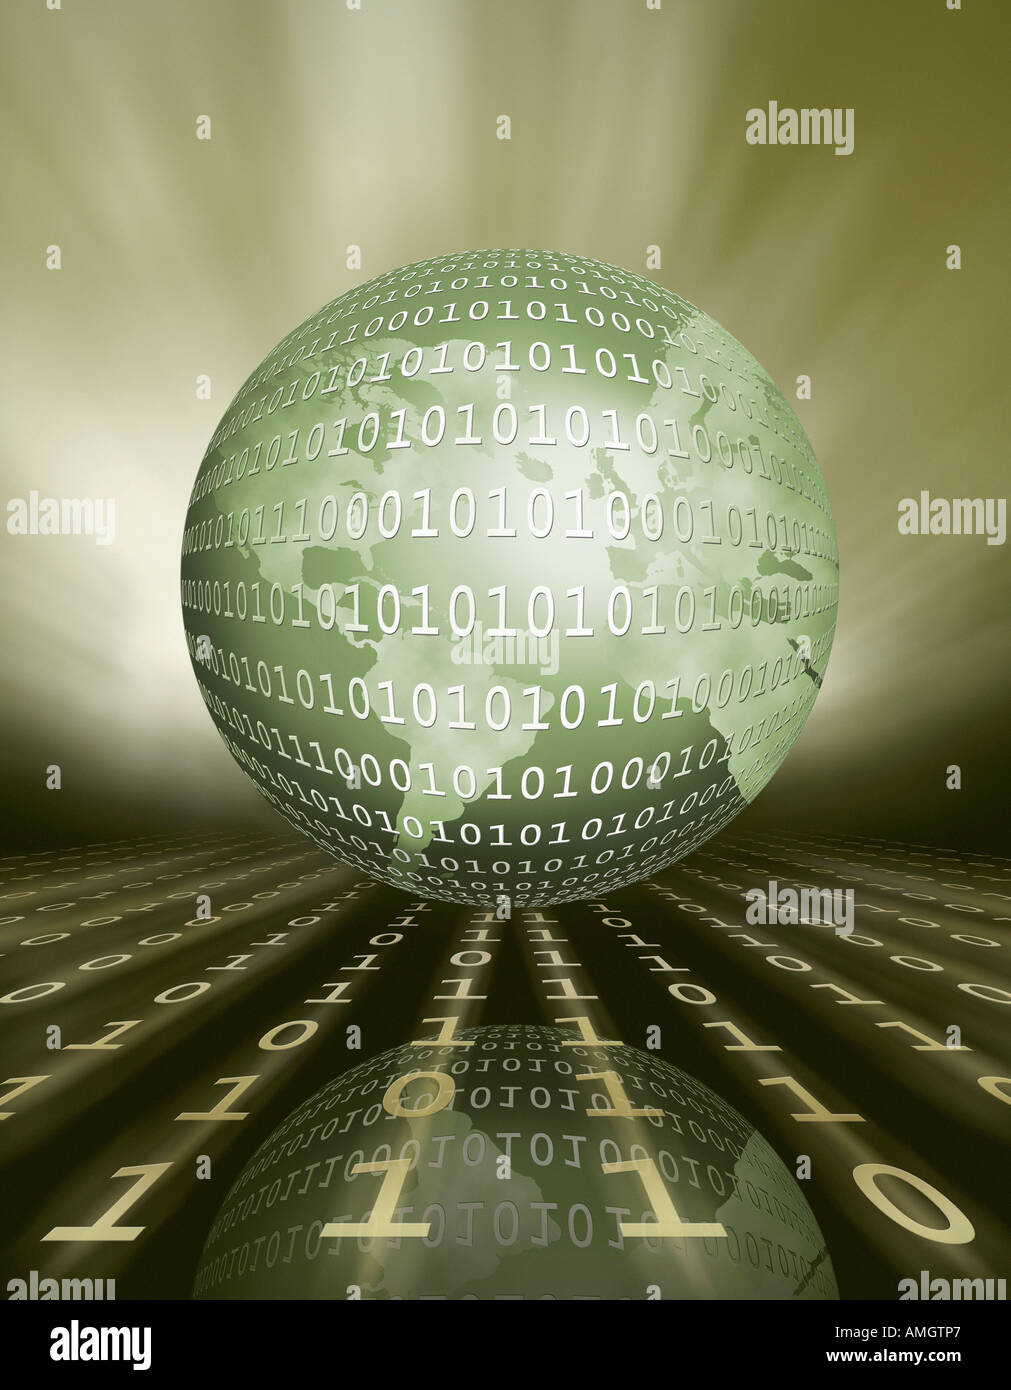 Globe with Binary Code on Reflective Surface with Rows of Binary Code Stock Photo